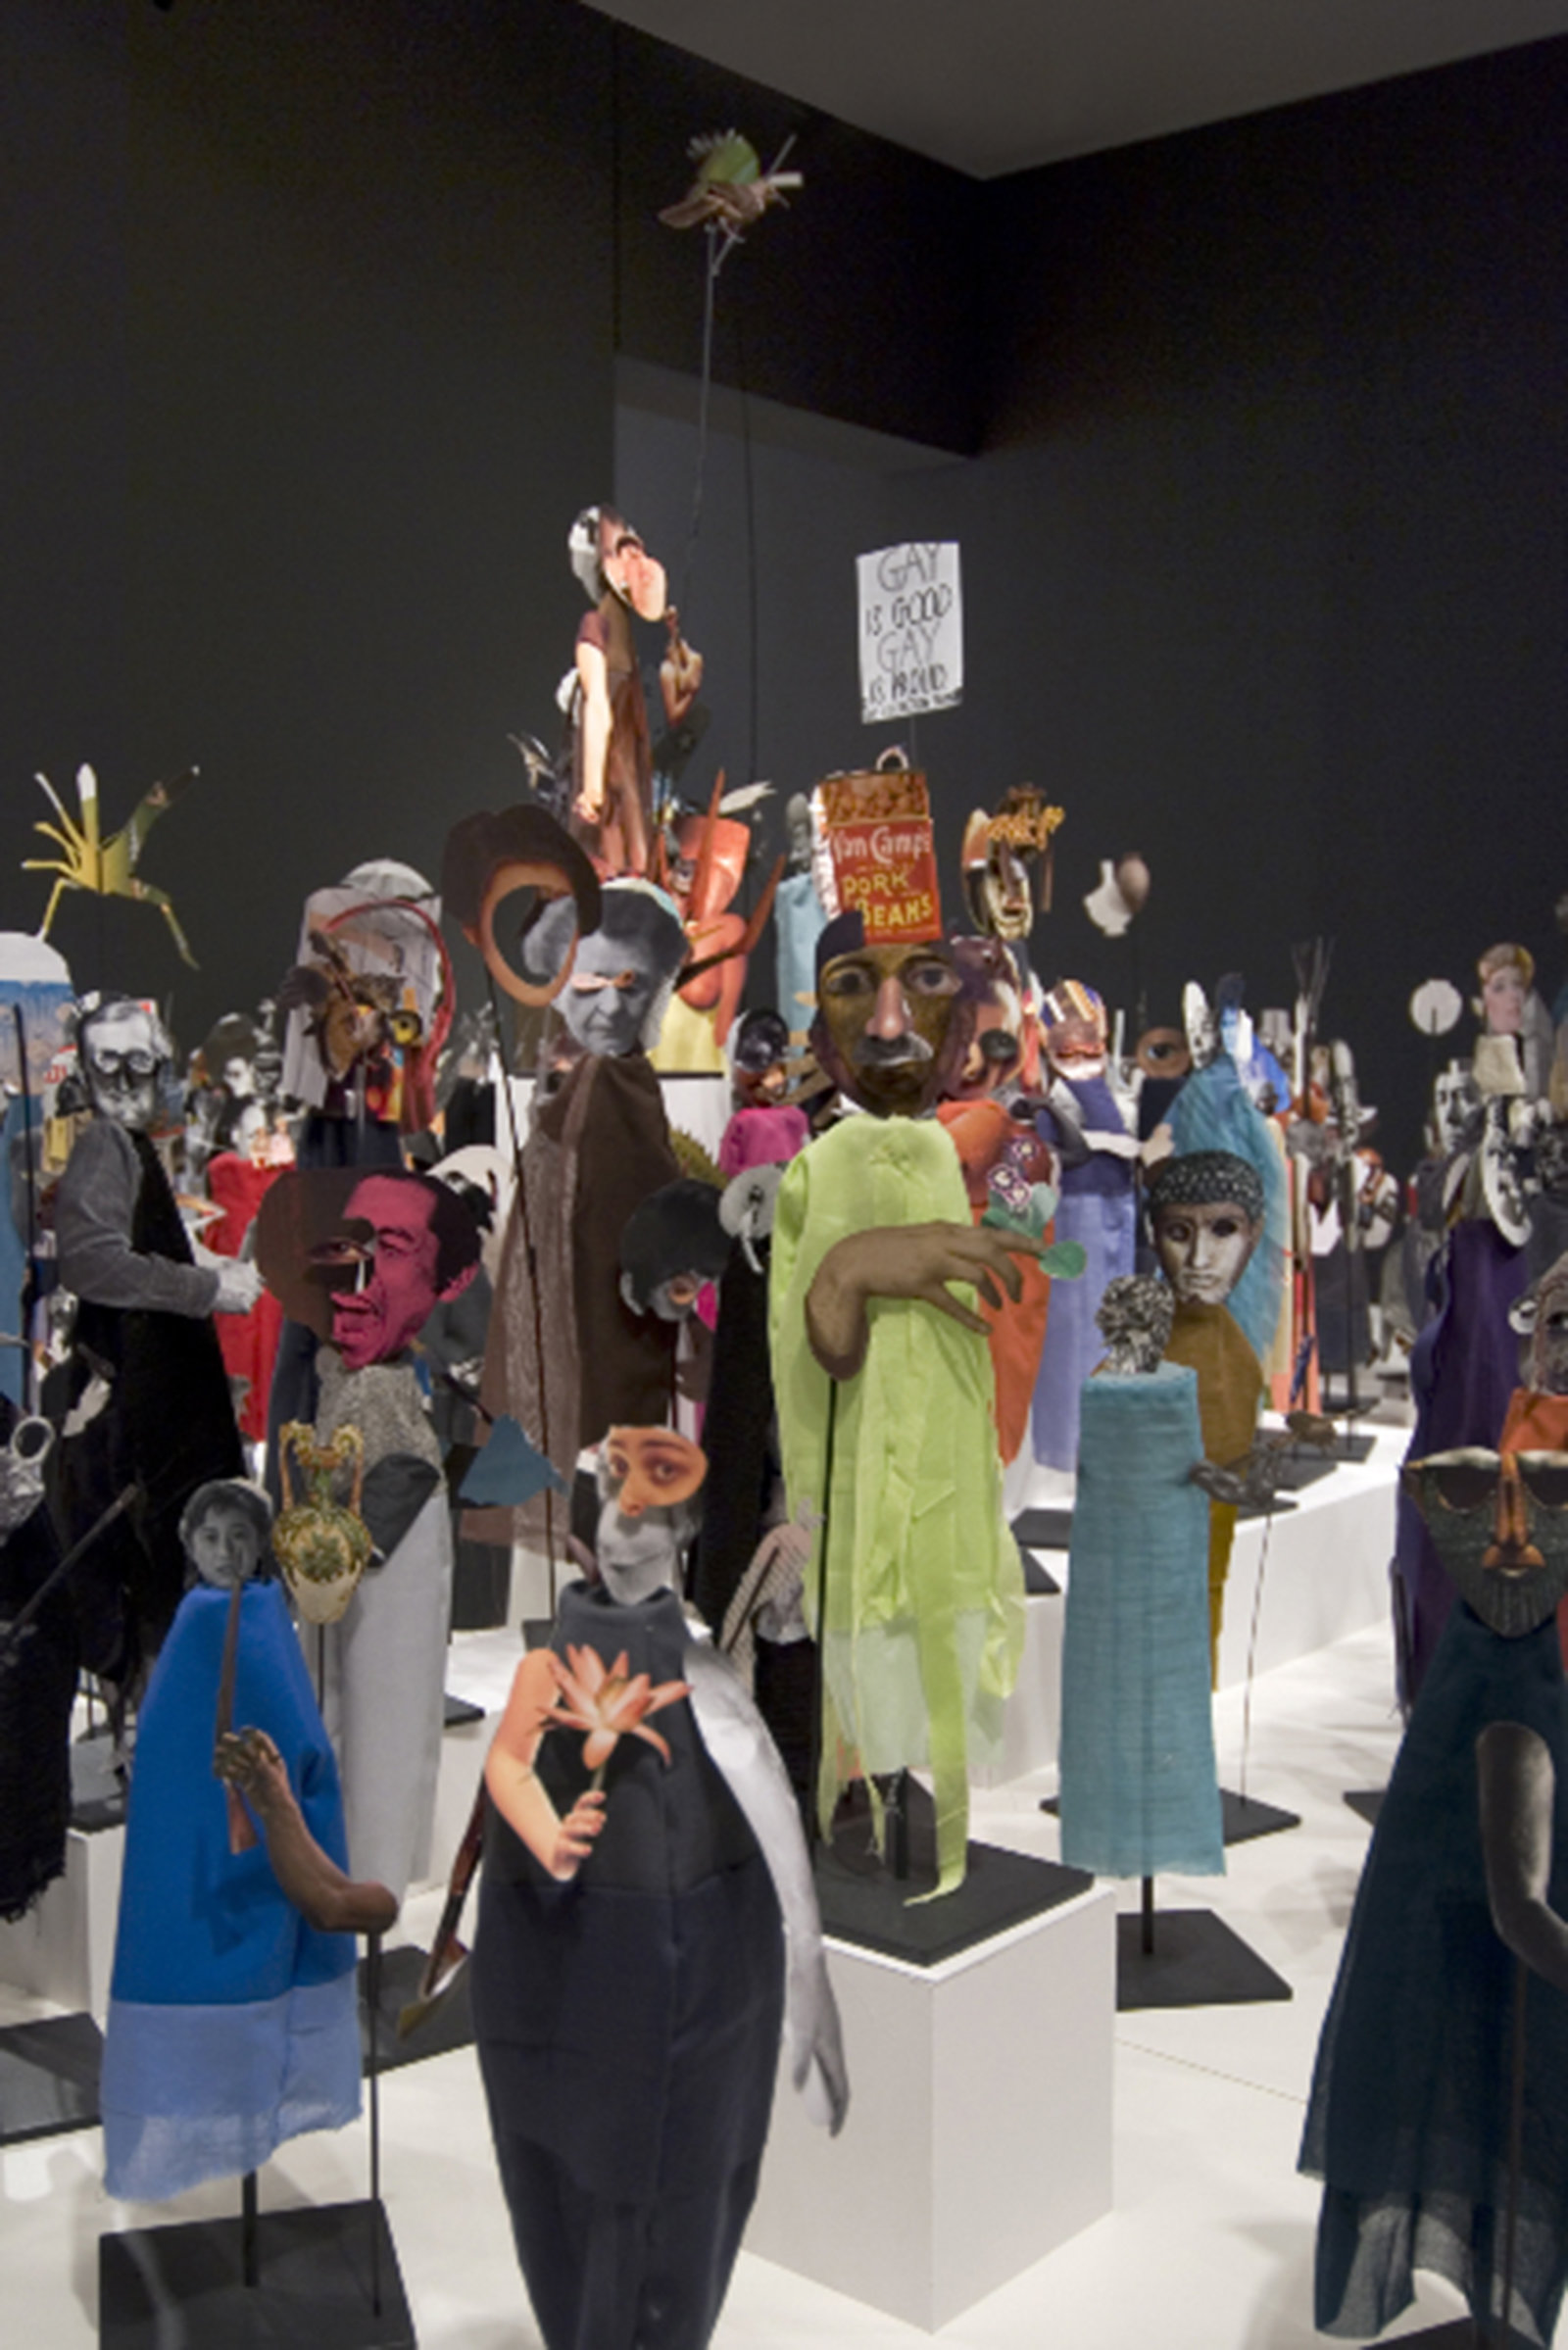 Geoffrey Farmer, The Surgeon and the Photographer, 2009, paper, textile, wood, and metal, 365 figures, dimensions variable. Installation view, Nomads, National Gallery of Canada, Toronto, 2009